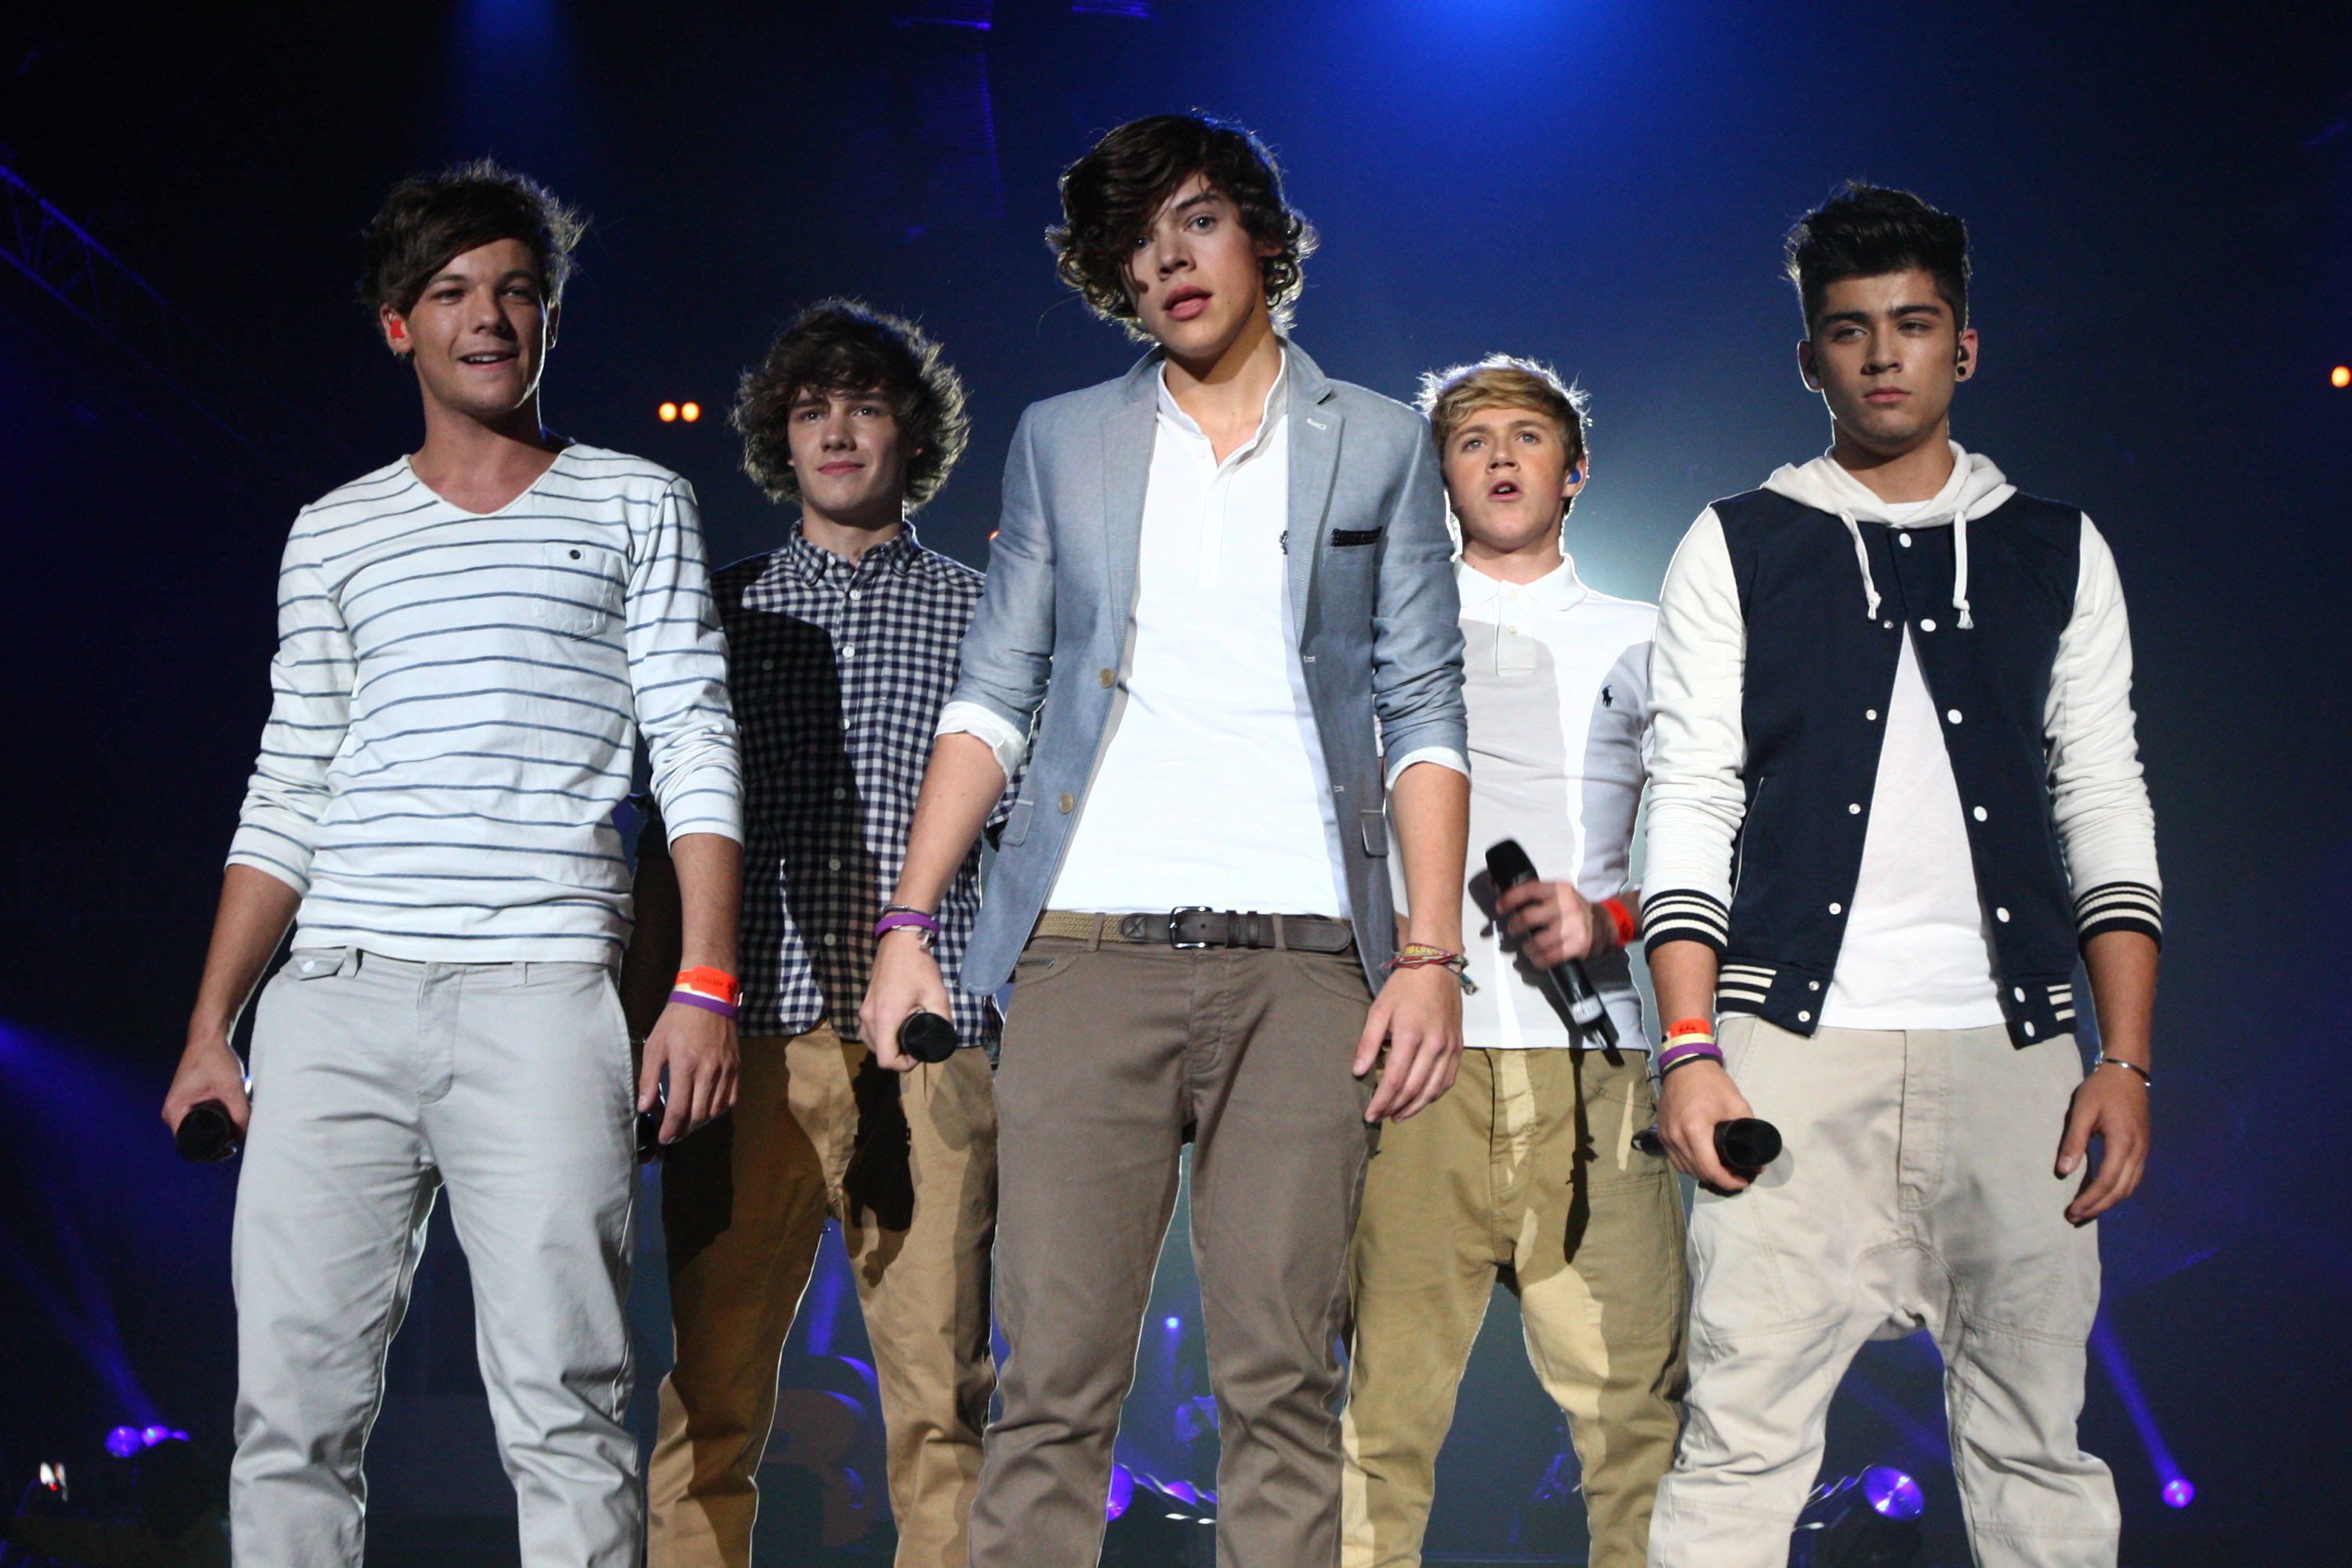 Harry Styles, Zain Malik, Louis Tomlinson, Liam Payne and Niall Horan of One Direction perform at the BBC Teen Awards